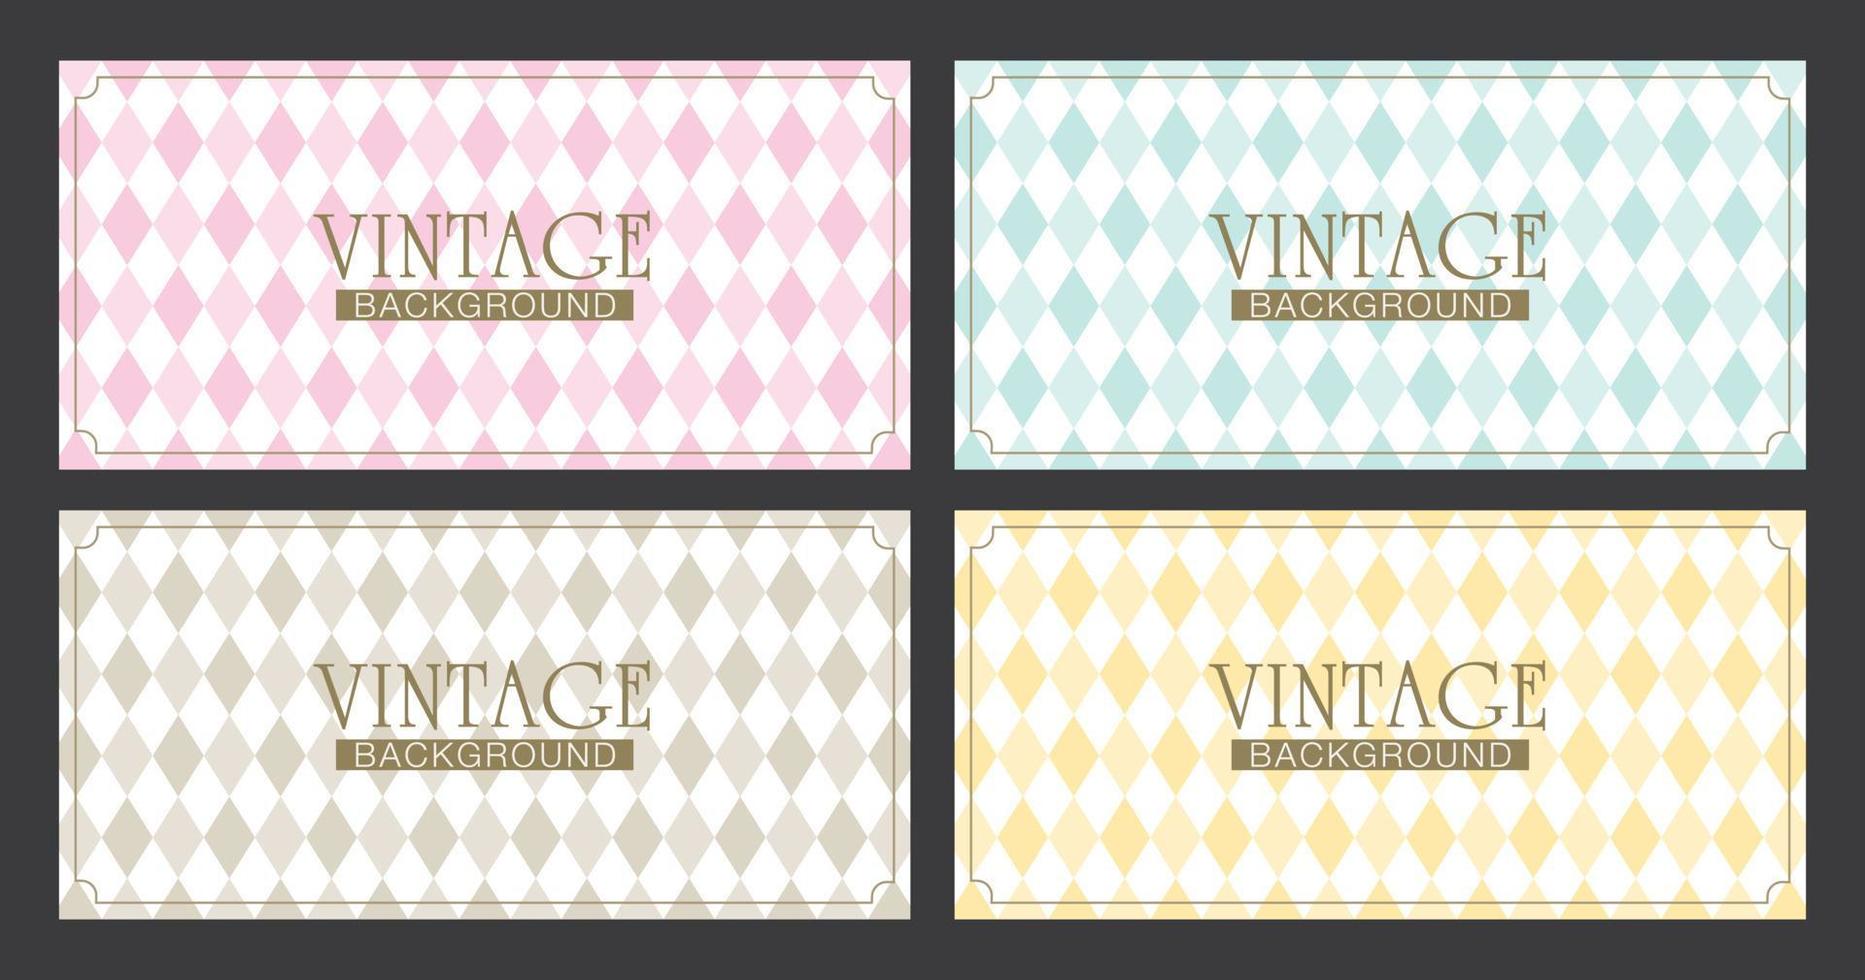 Diamond pattern background vector collection in vintage style.